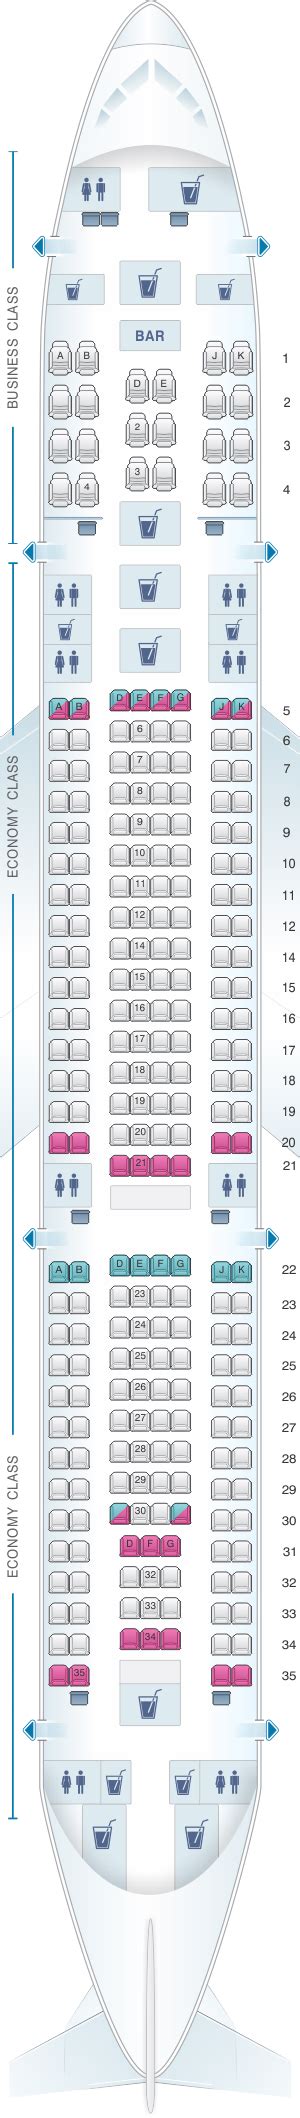 turkish airlines seating map